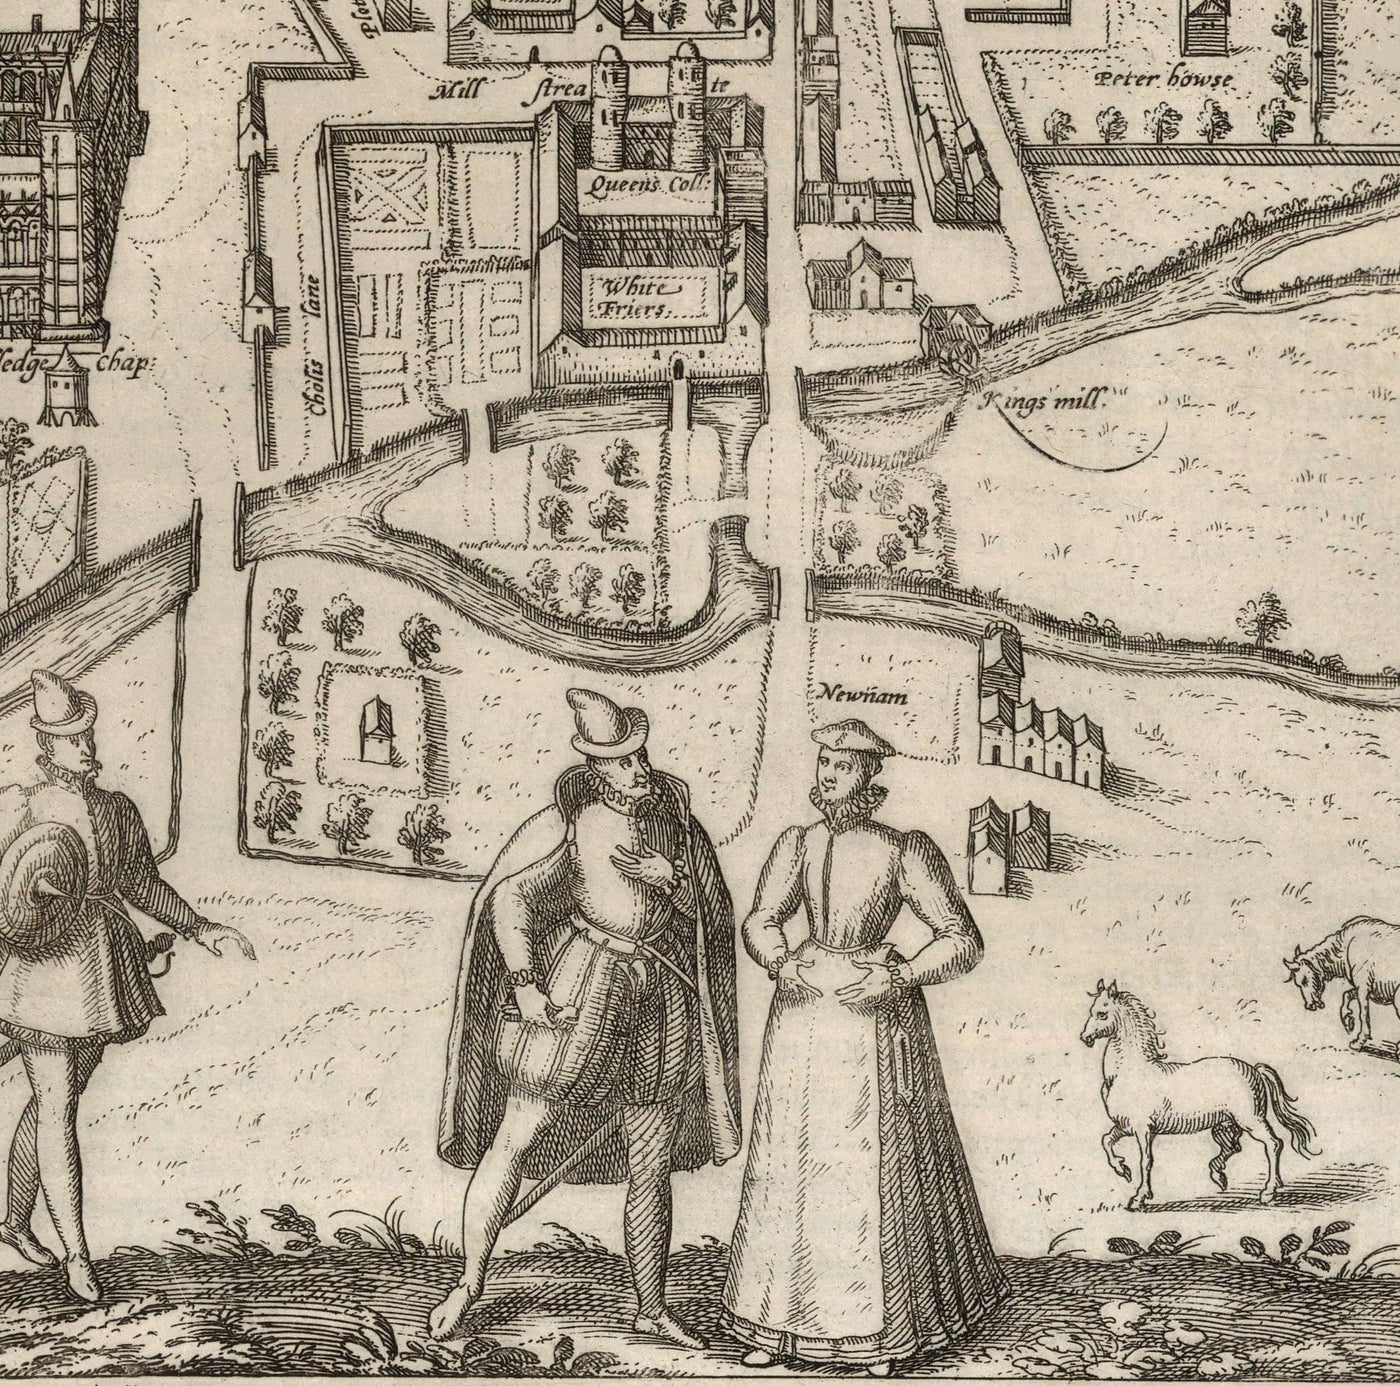 Old Map of Cambridge and University Colleges, 1575 by Georg Braun - Trinity, Kings, Queens, Clare